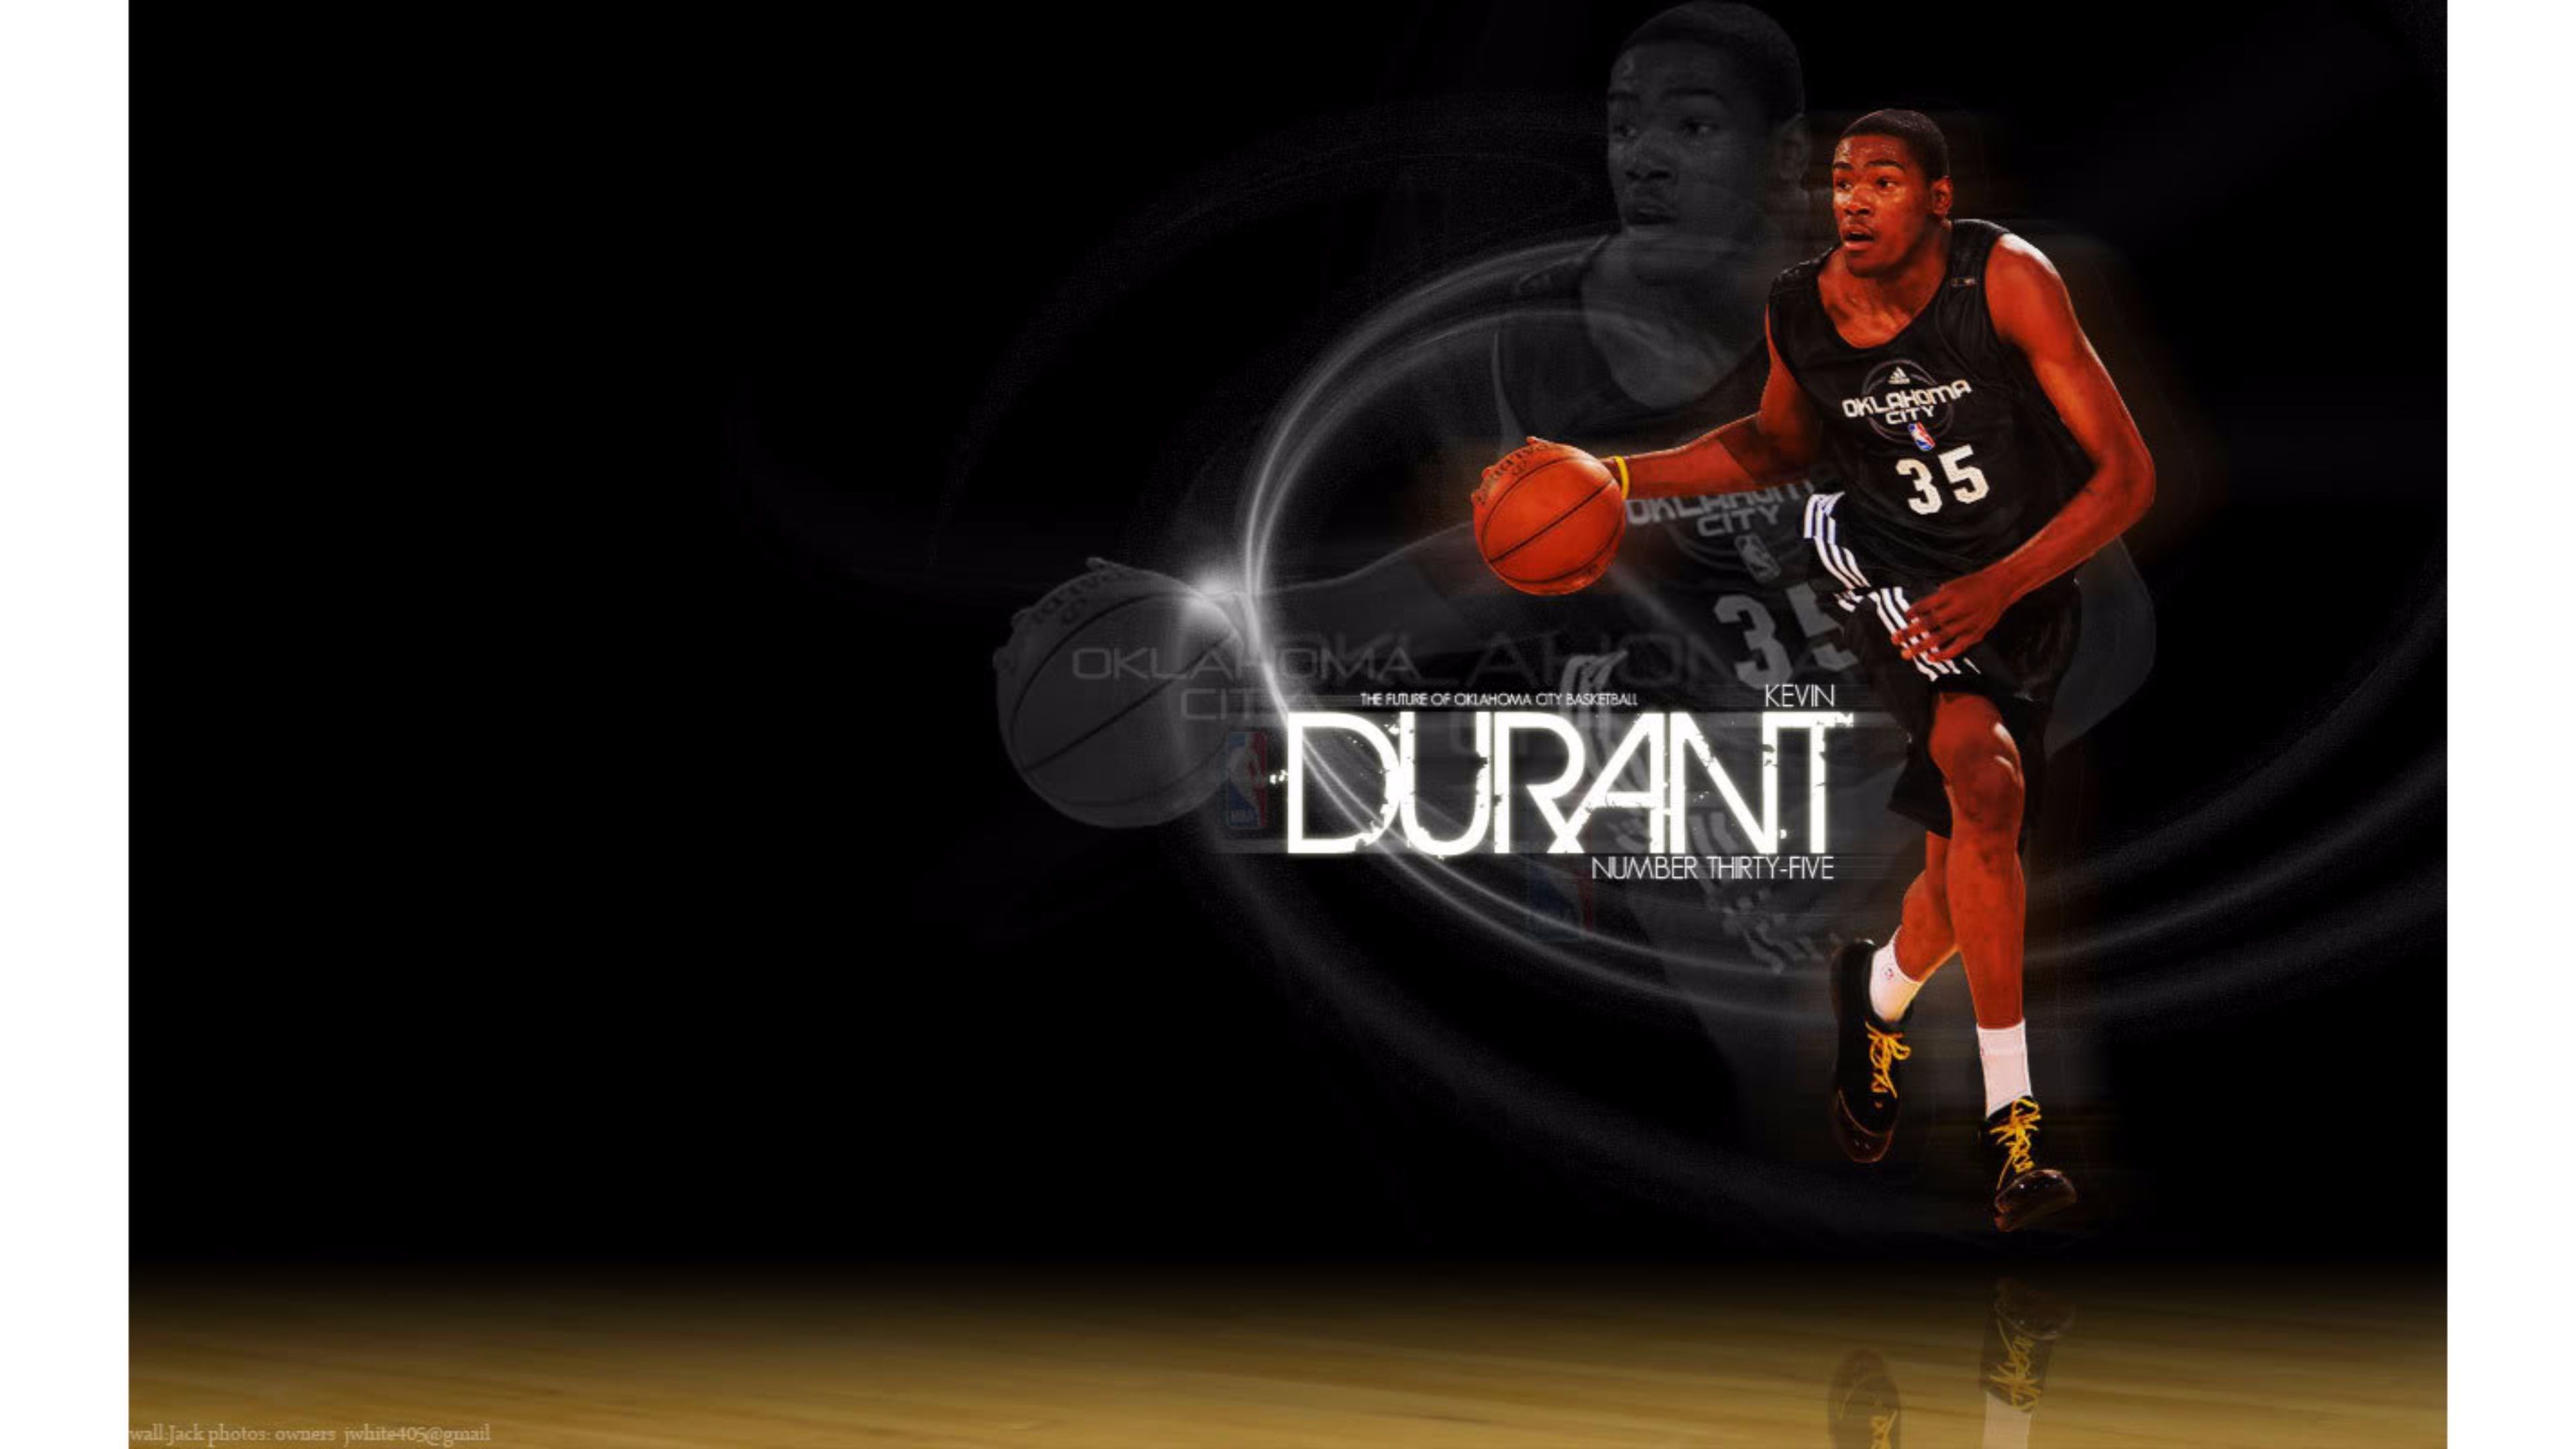 Kevin Durant Total Recall Wallpaper on Behance